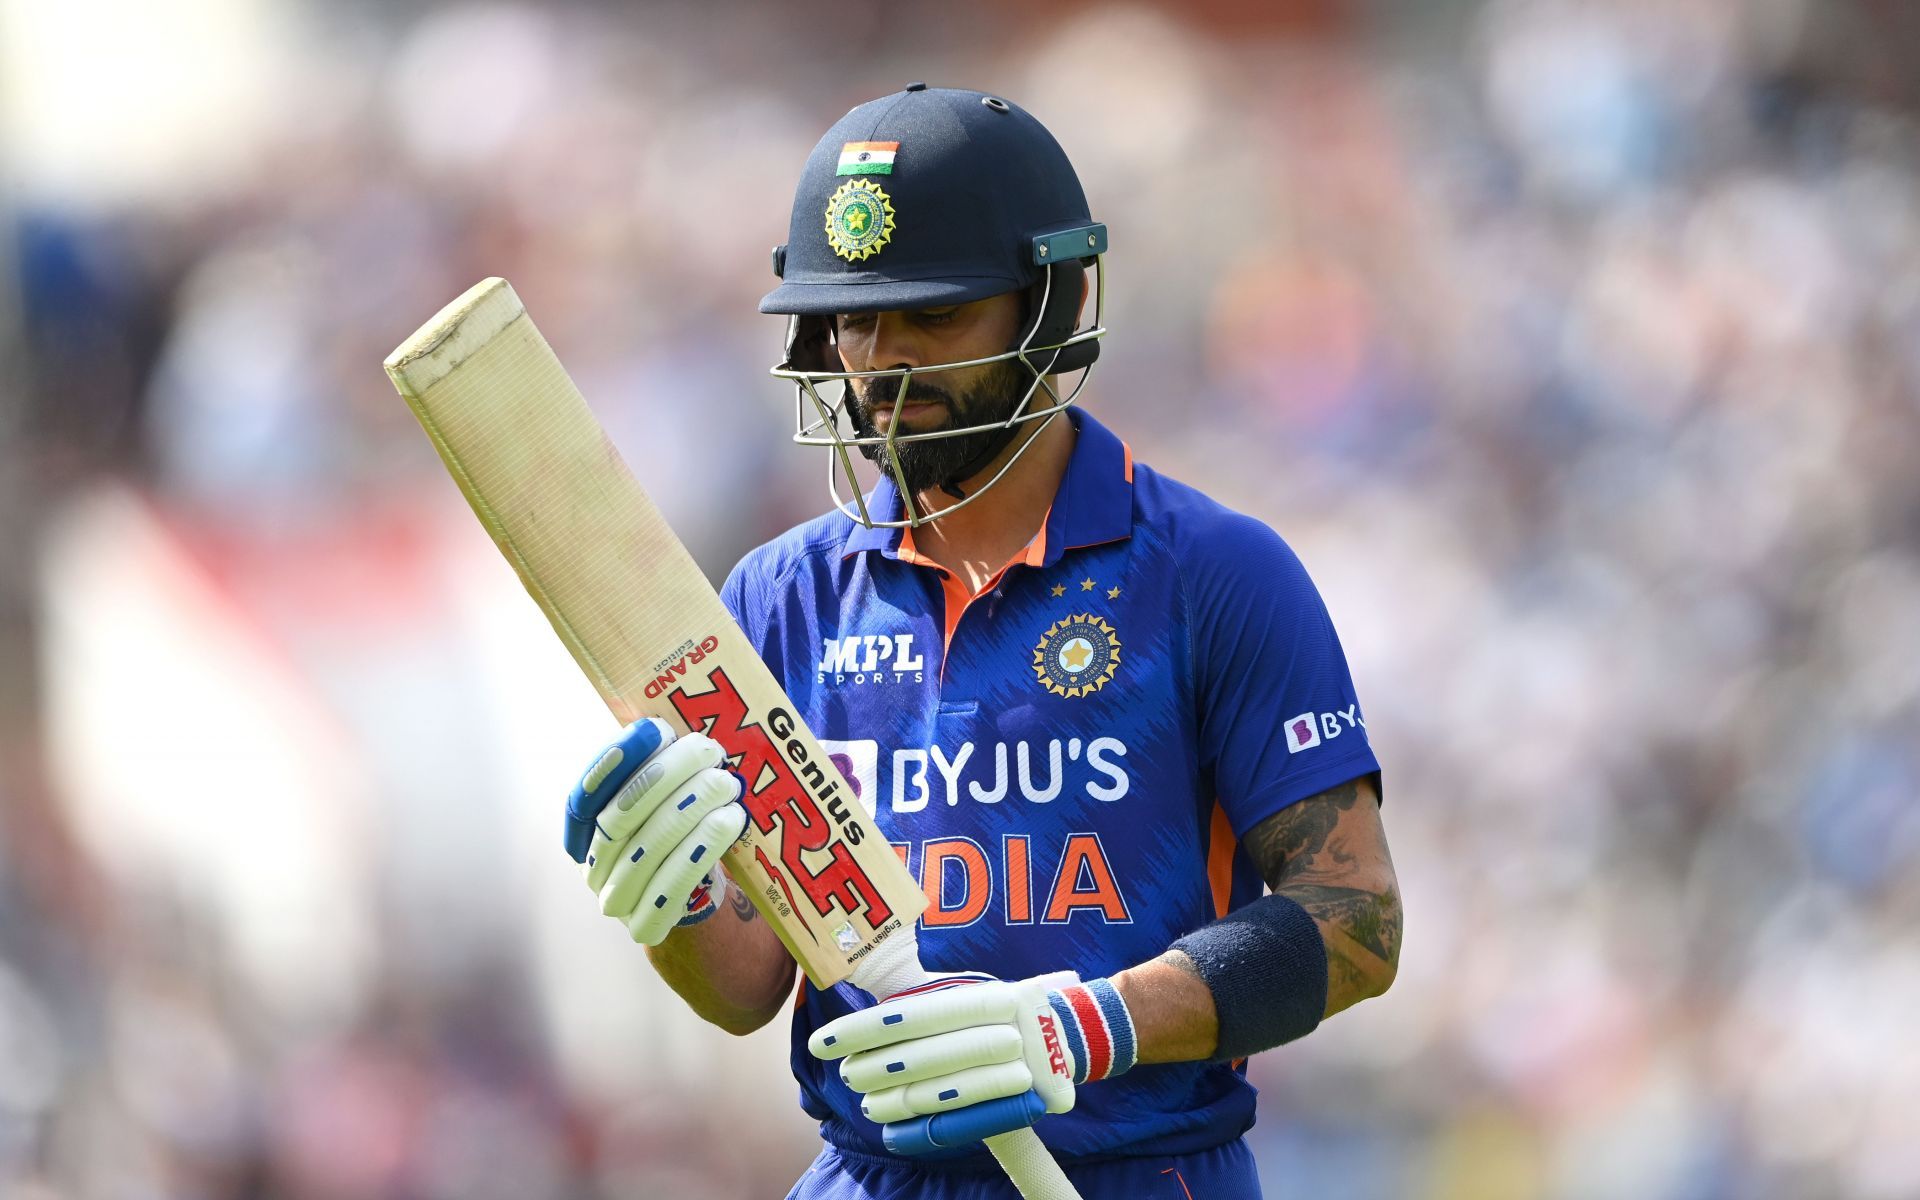 England v India - 3rd Royal London Series One Day International (Image: Getty)